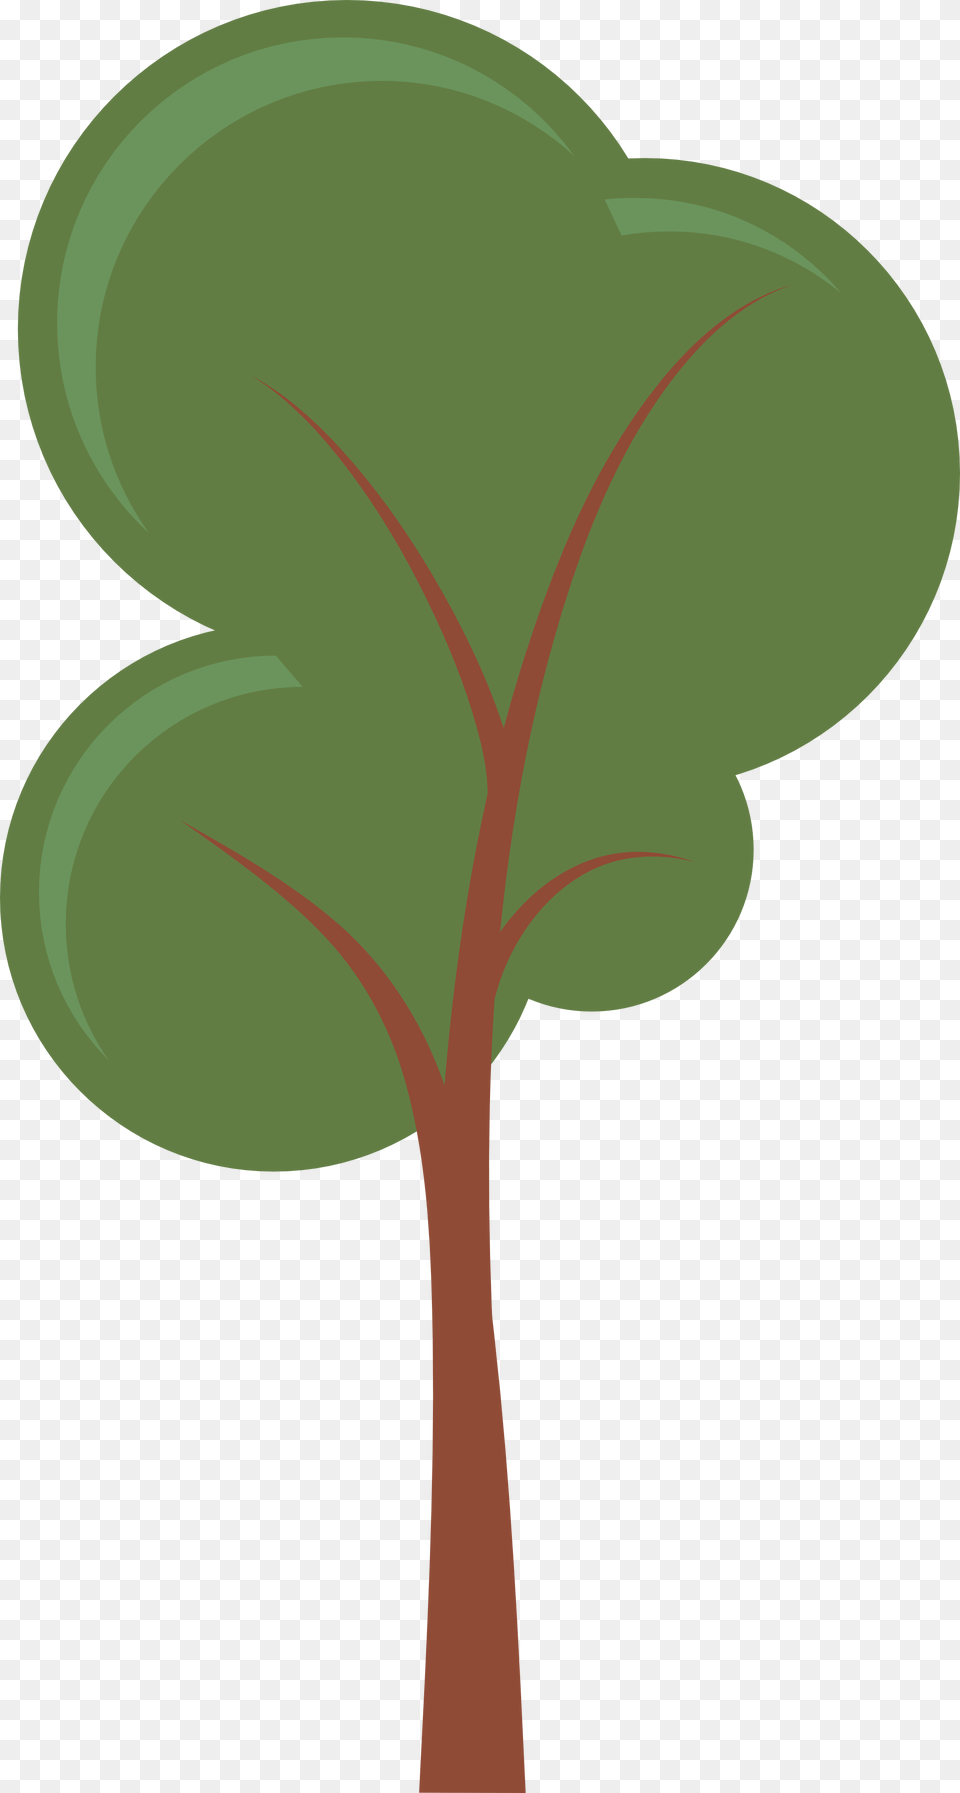 Tree Of Life Clipart At Getdrawings Small Tree Cartoon, Leaf, Plant, Food, Produce Png Image